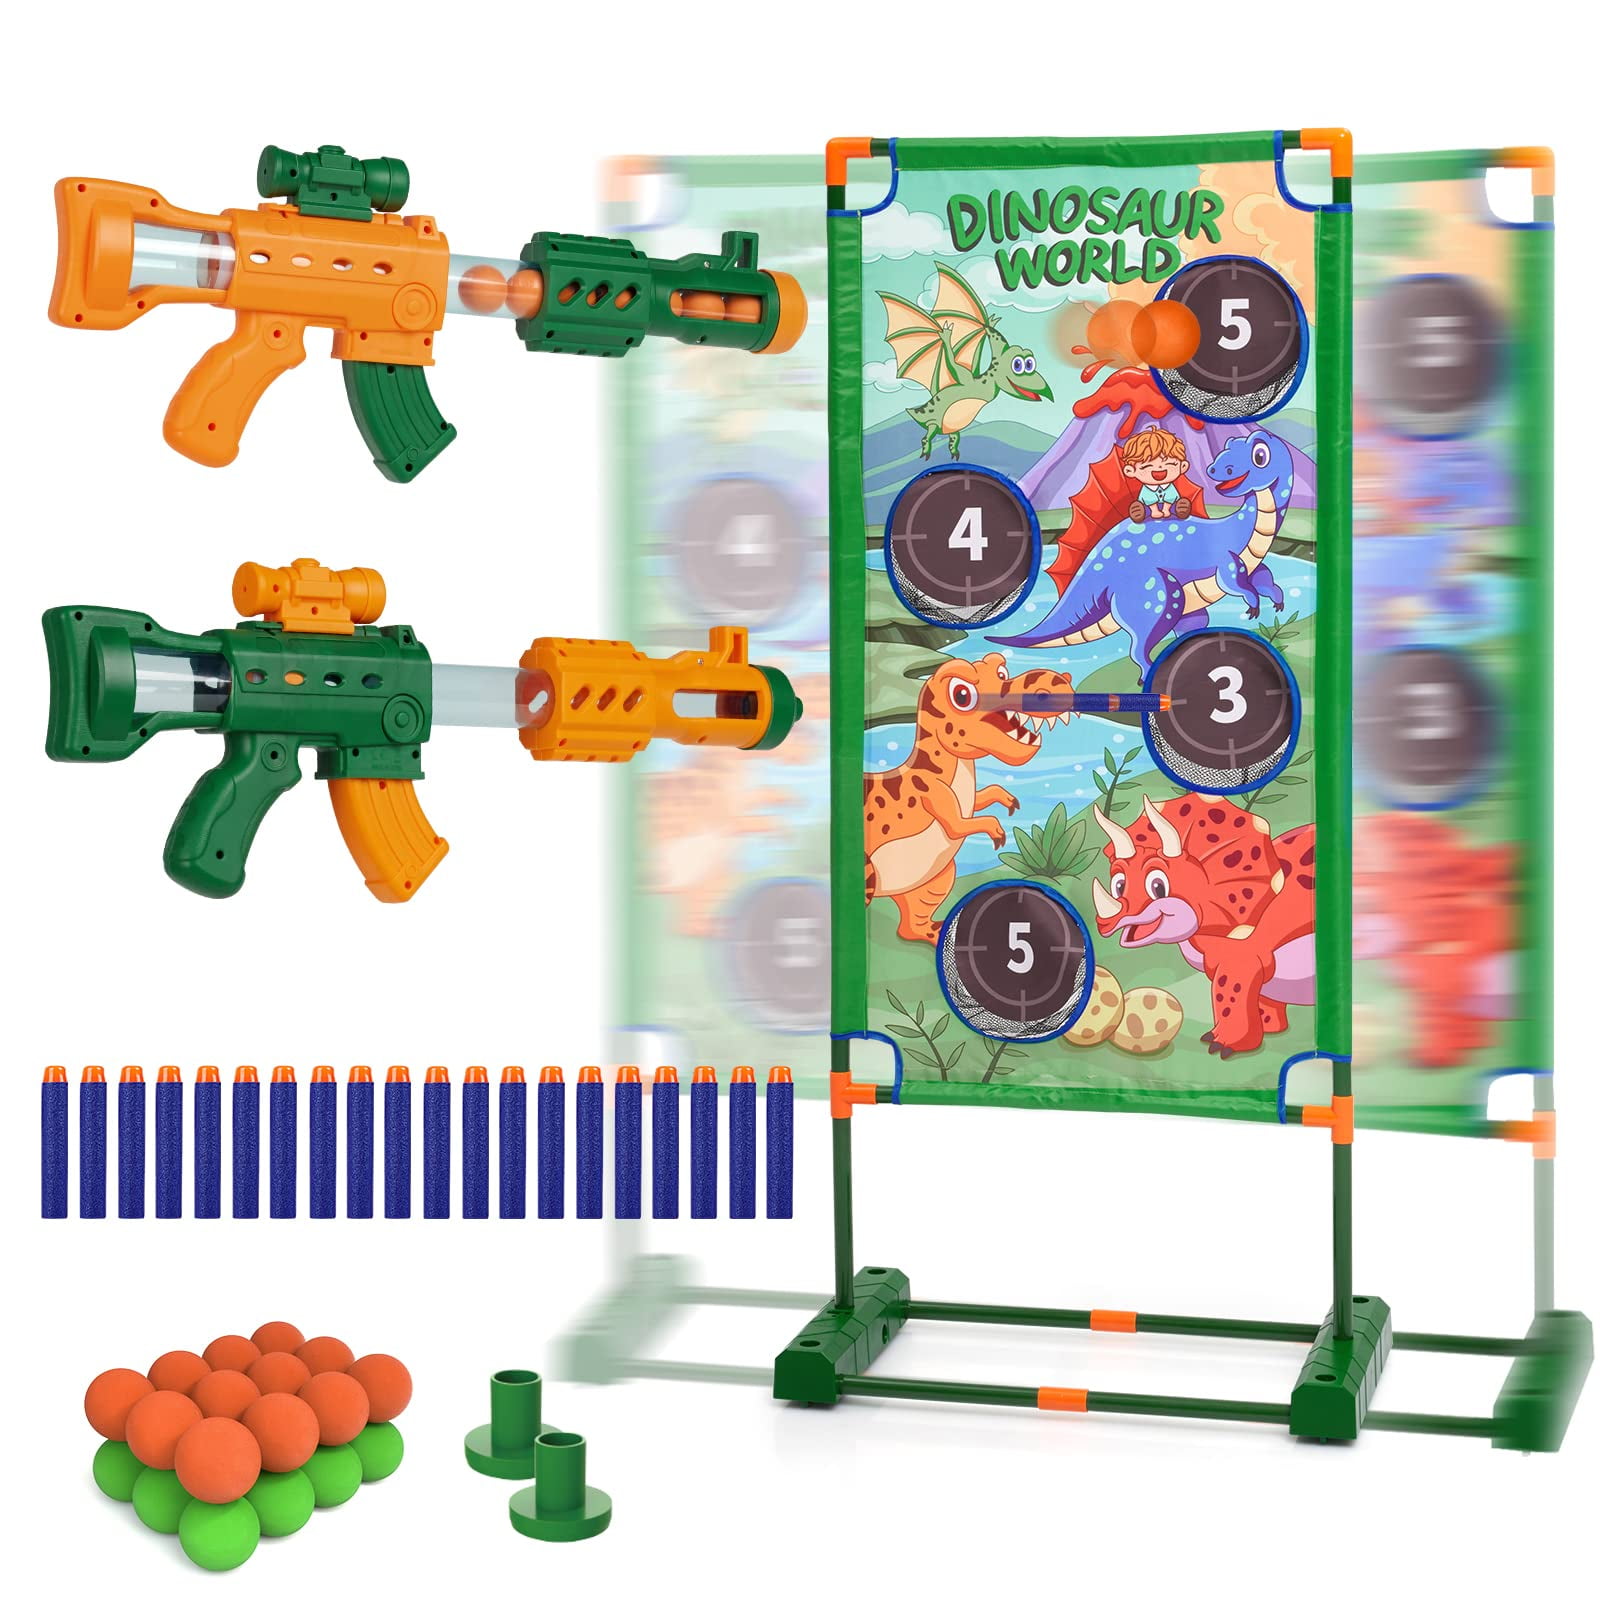 EastVita Dinosaur Shooting Games for Kids, Moving Target Game Toys for 5 6 7 8 9 10 Year Old Boys, 2PK Toy Gun with Foam Bullets Indoor Activities for Kids Ages 3+